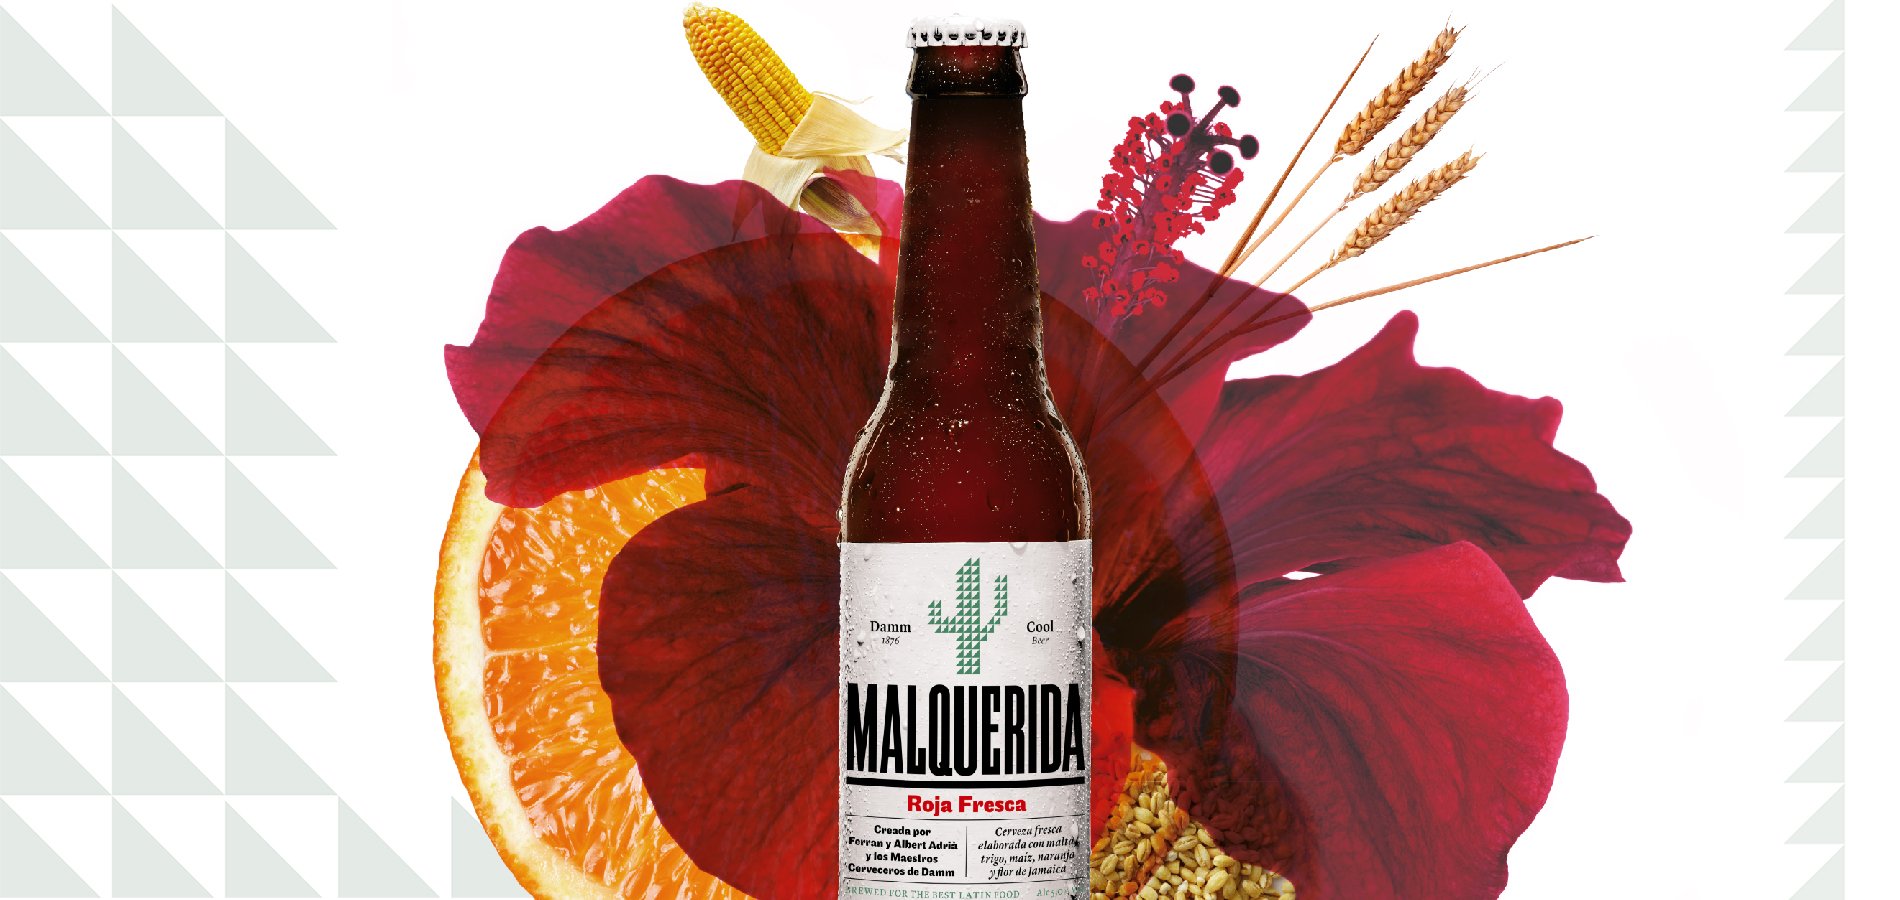 A Malquerida bottle with some of its flavourful ingredients